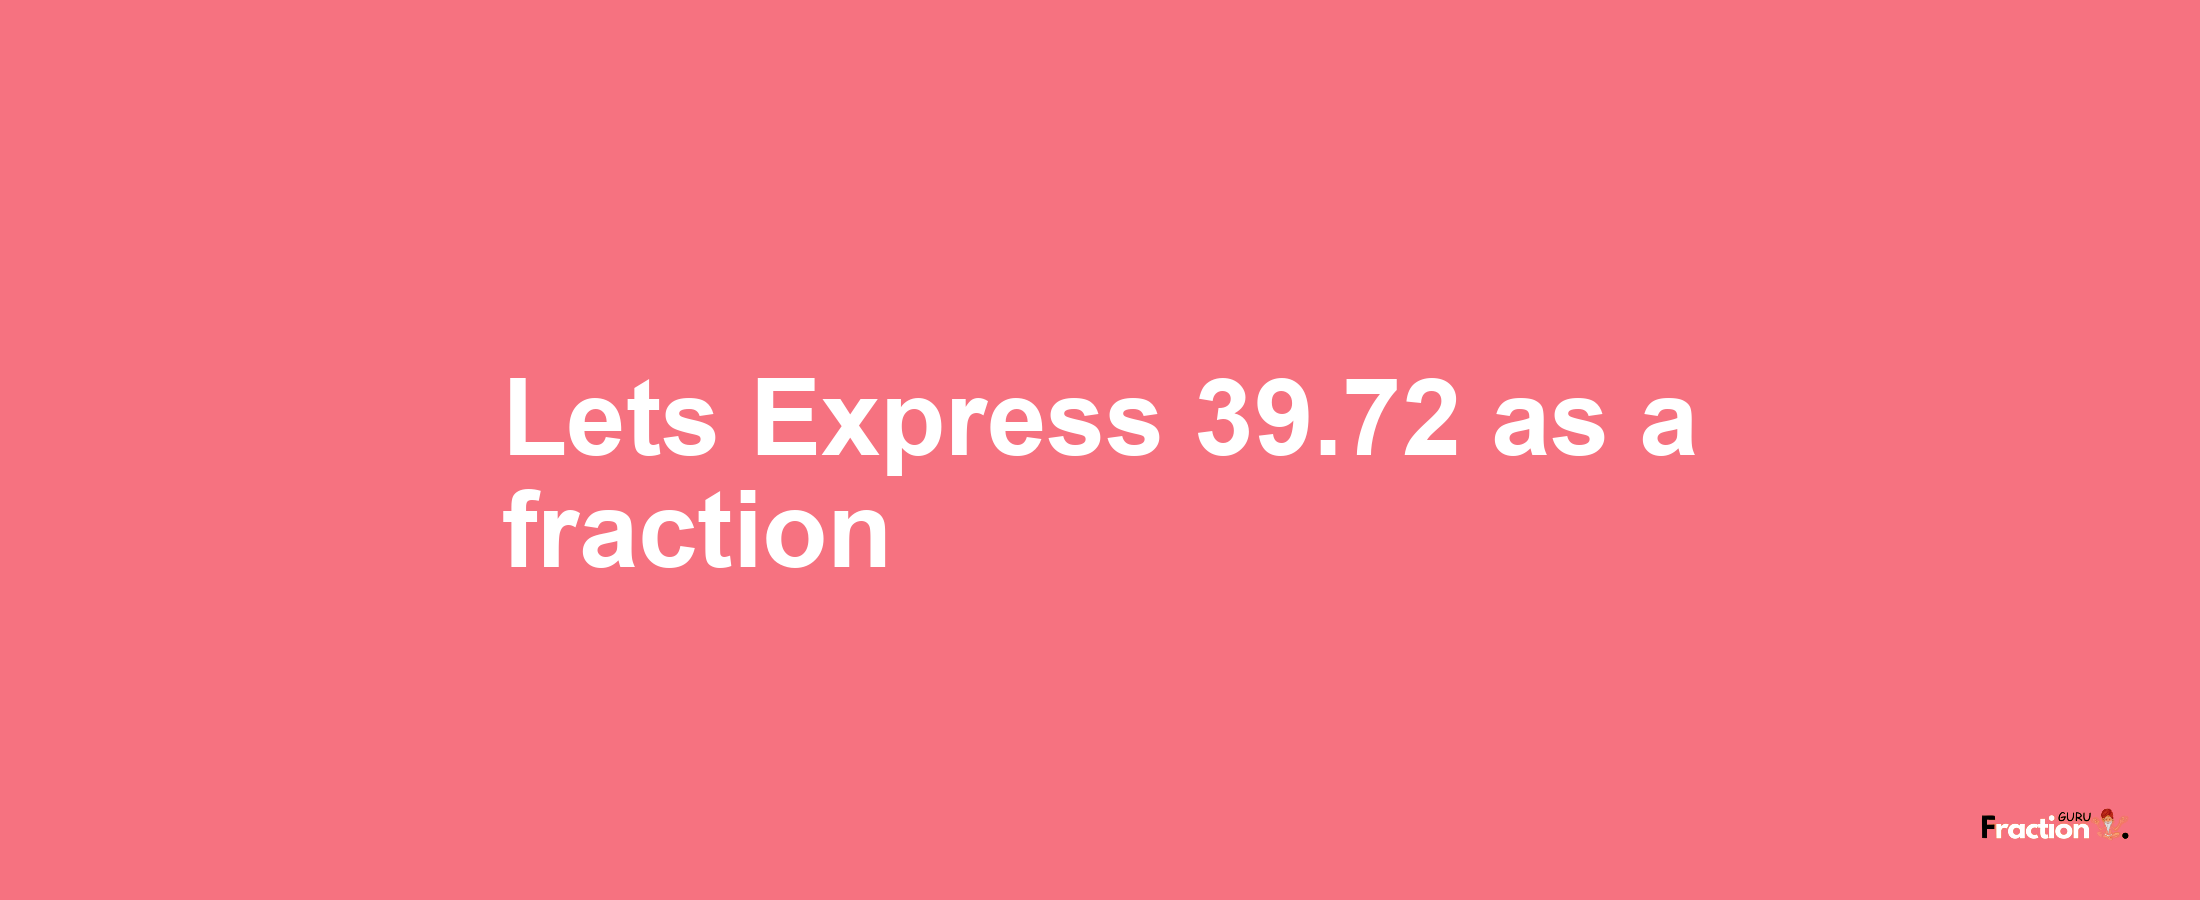 Lets Express 39.72 as afraction